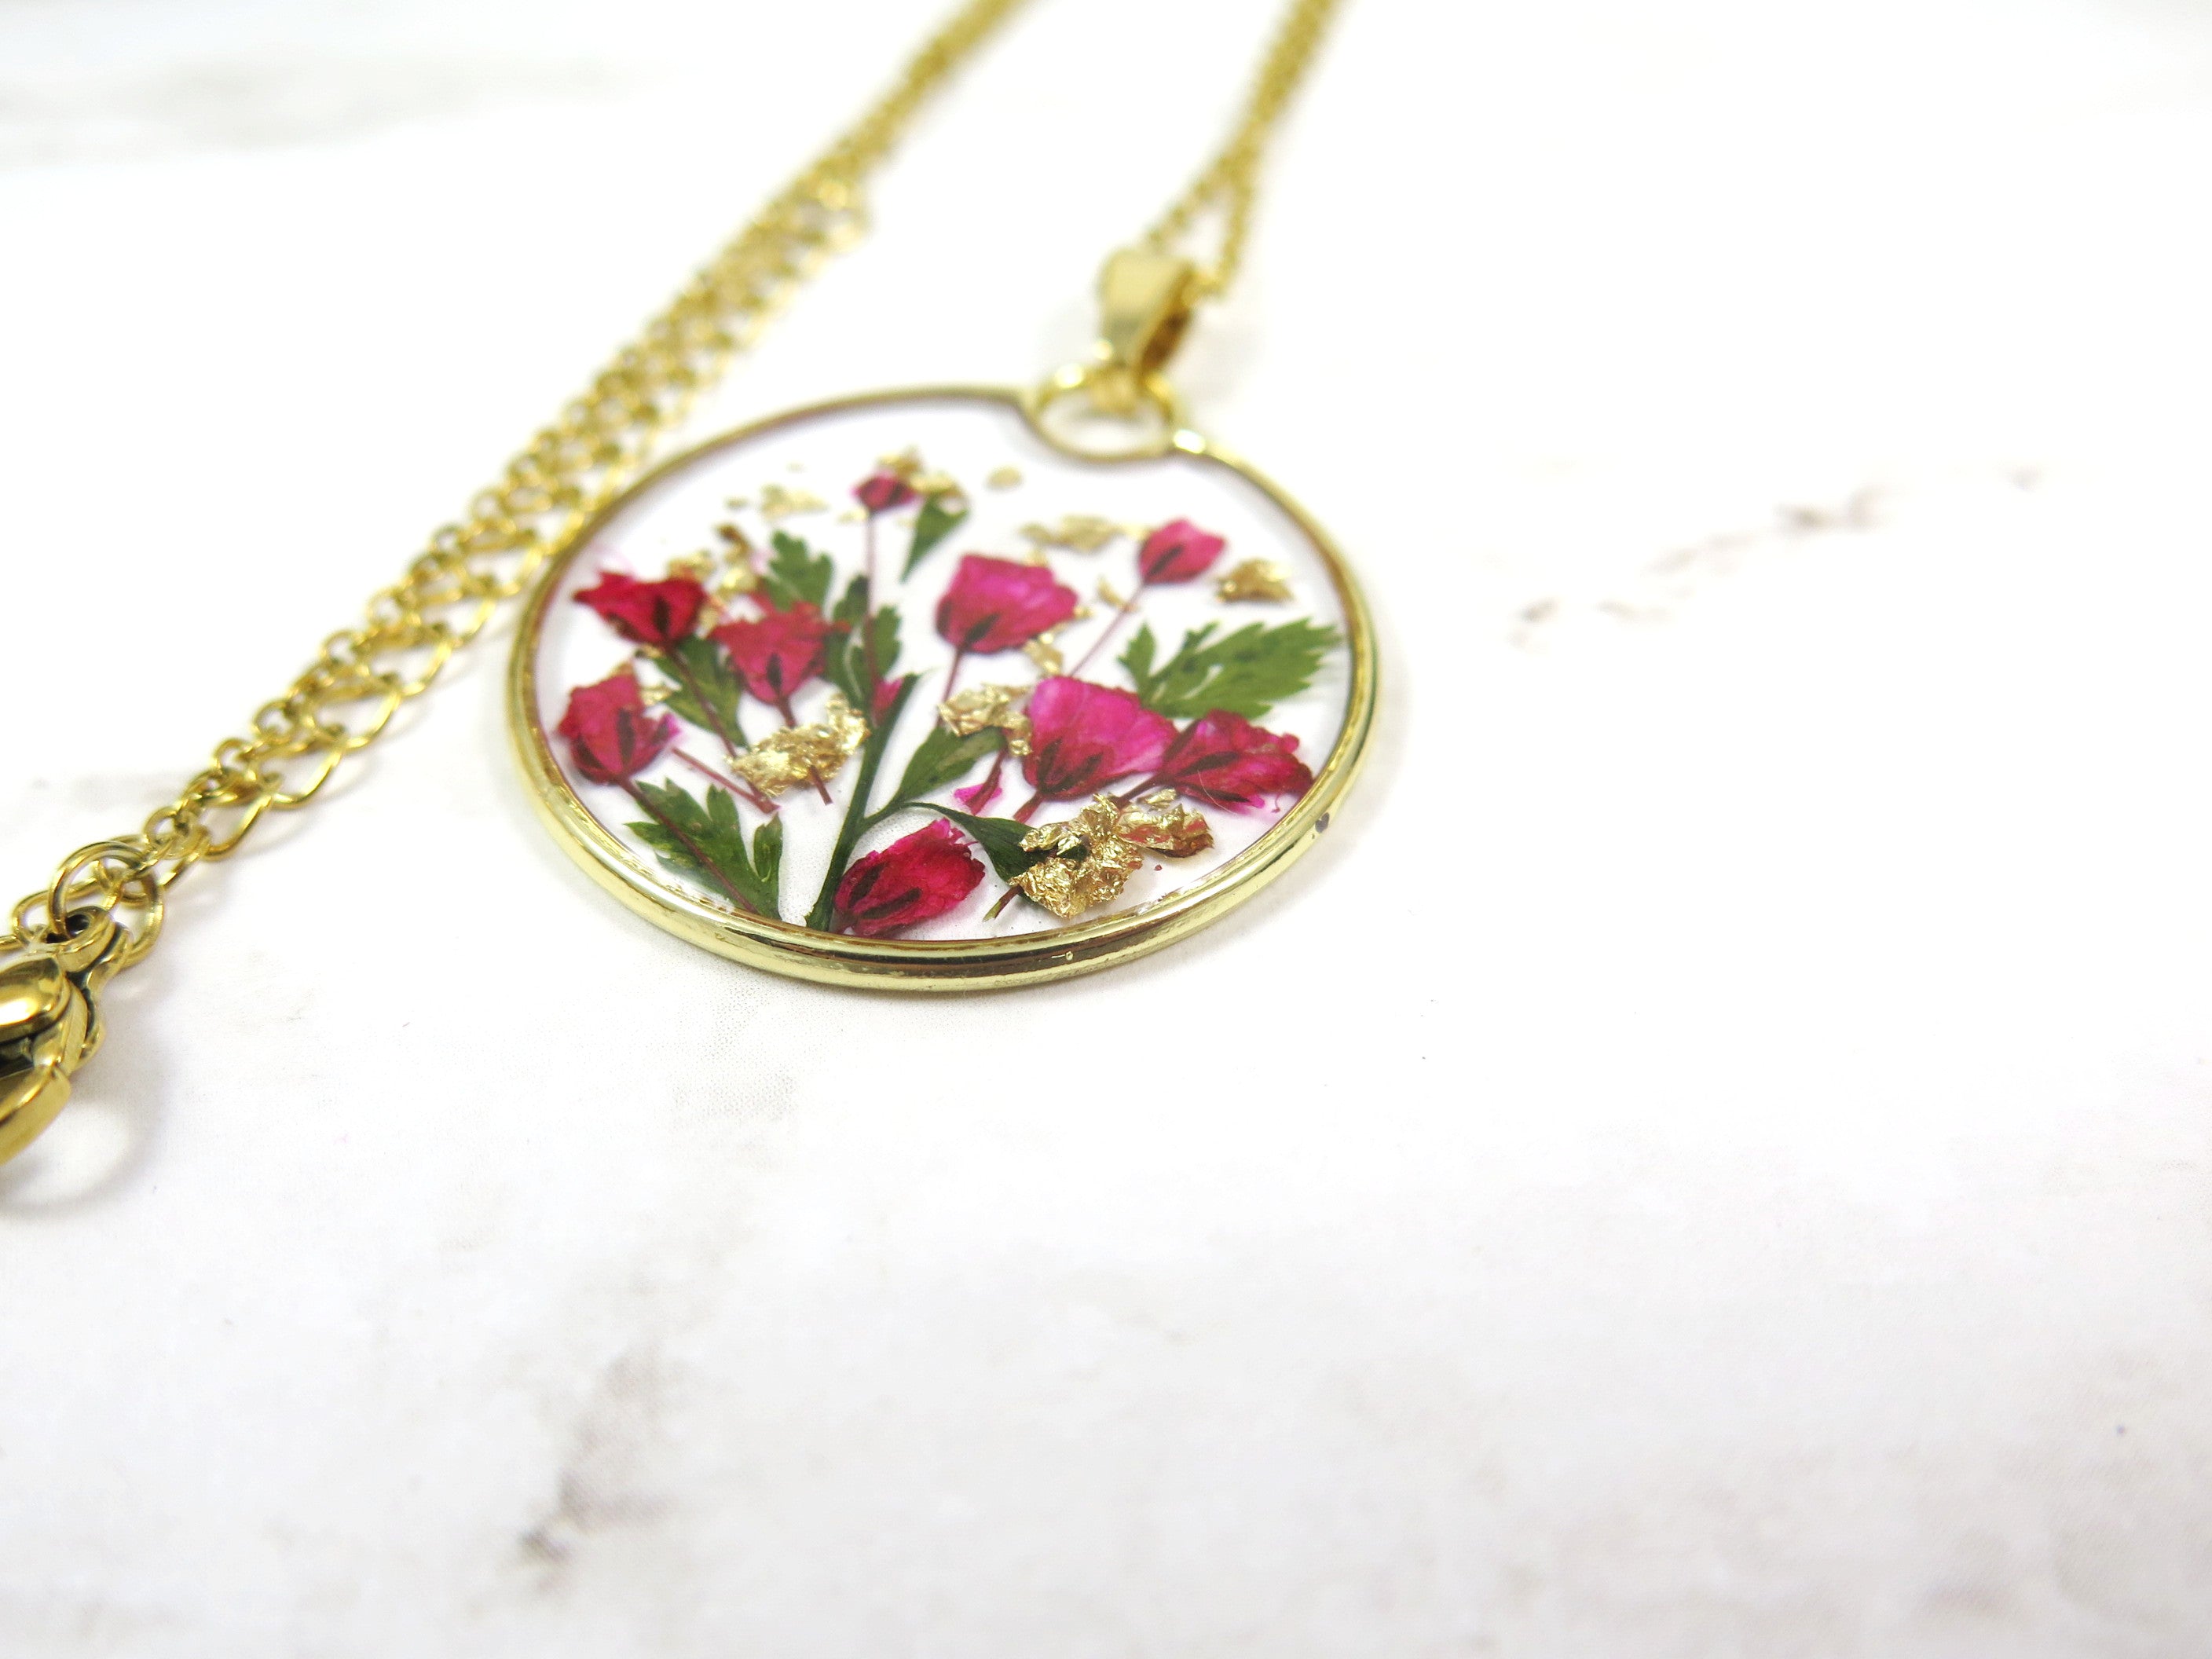 Baby Breath resin necklace, Handmade resin jewelry – Smile with Flower